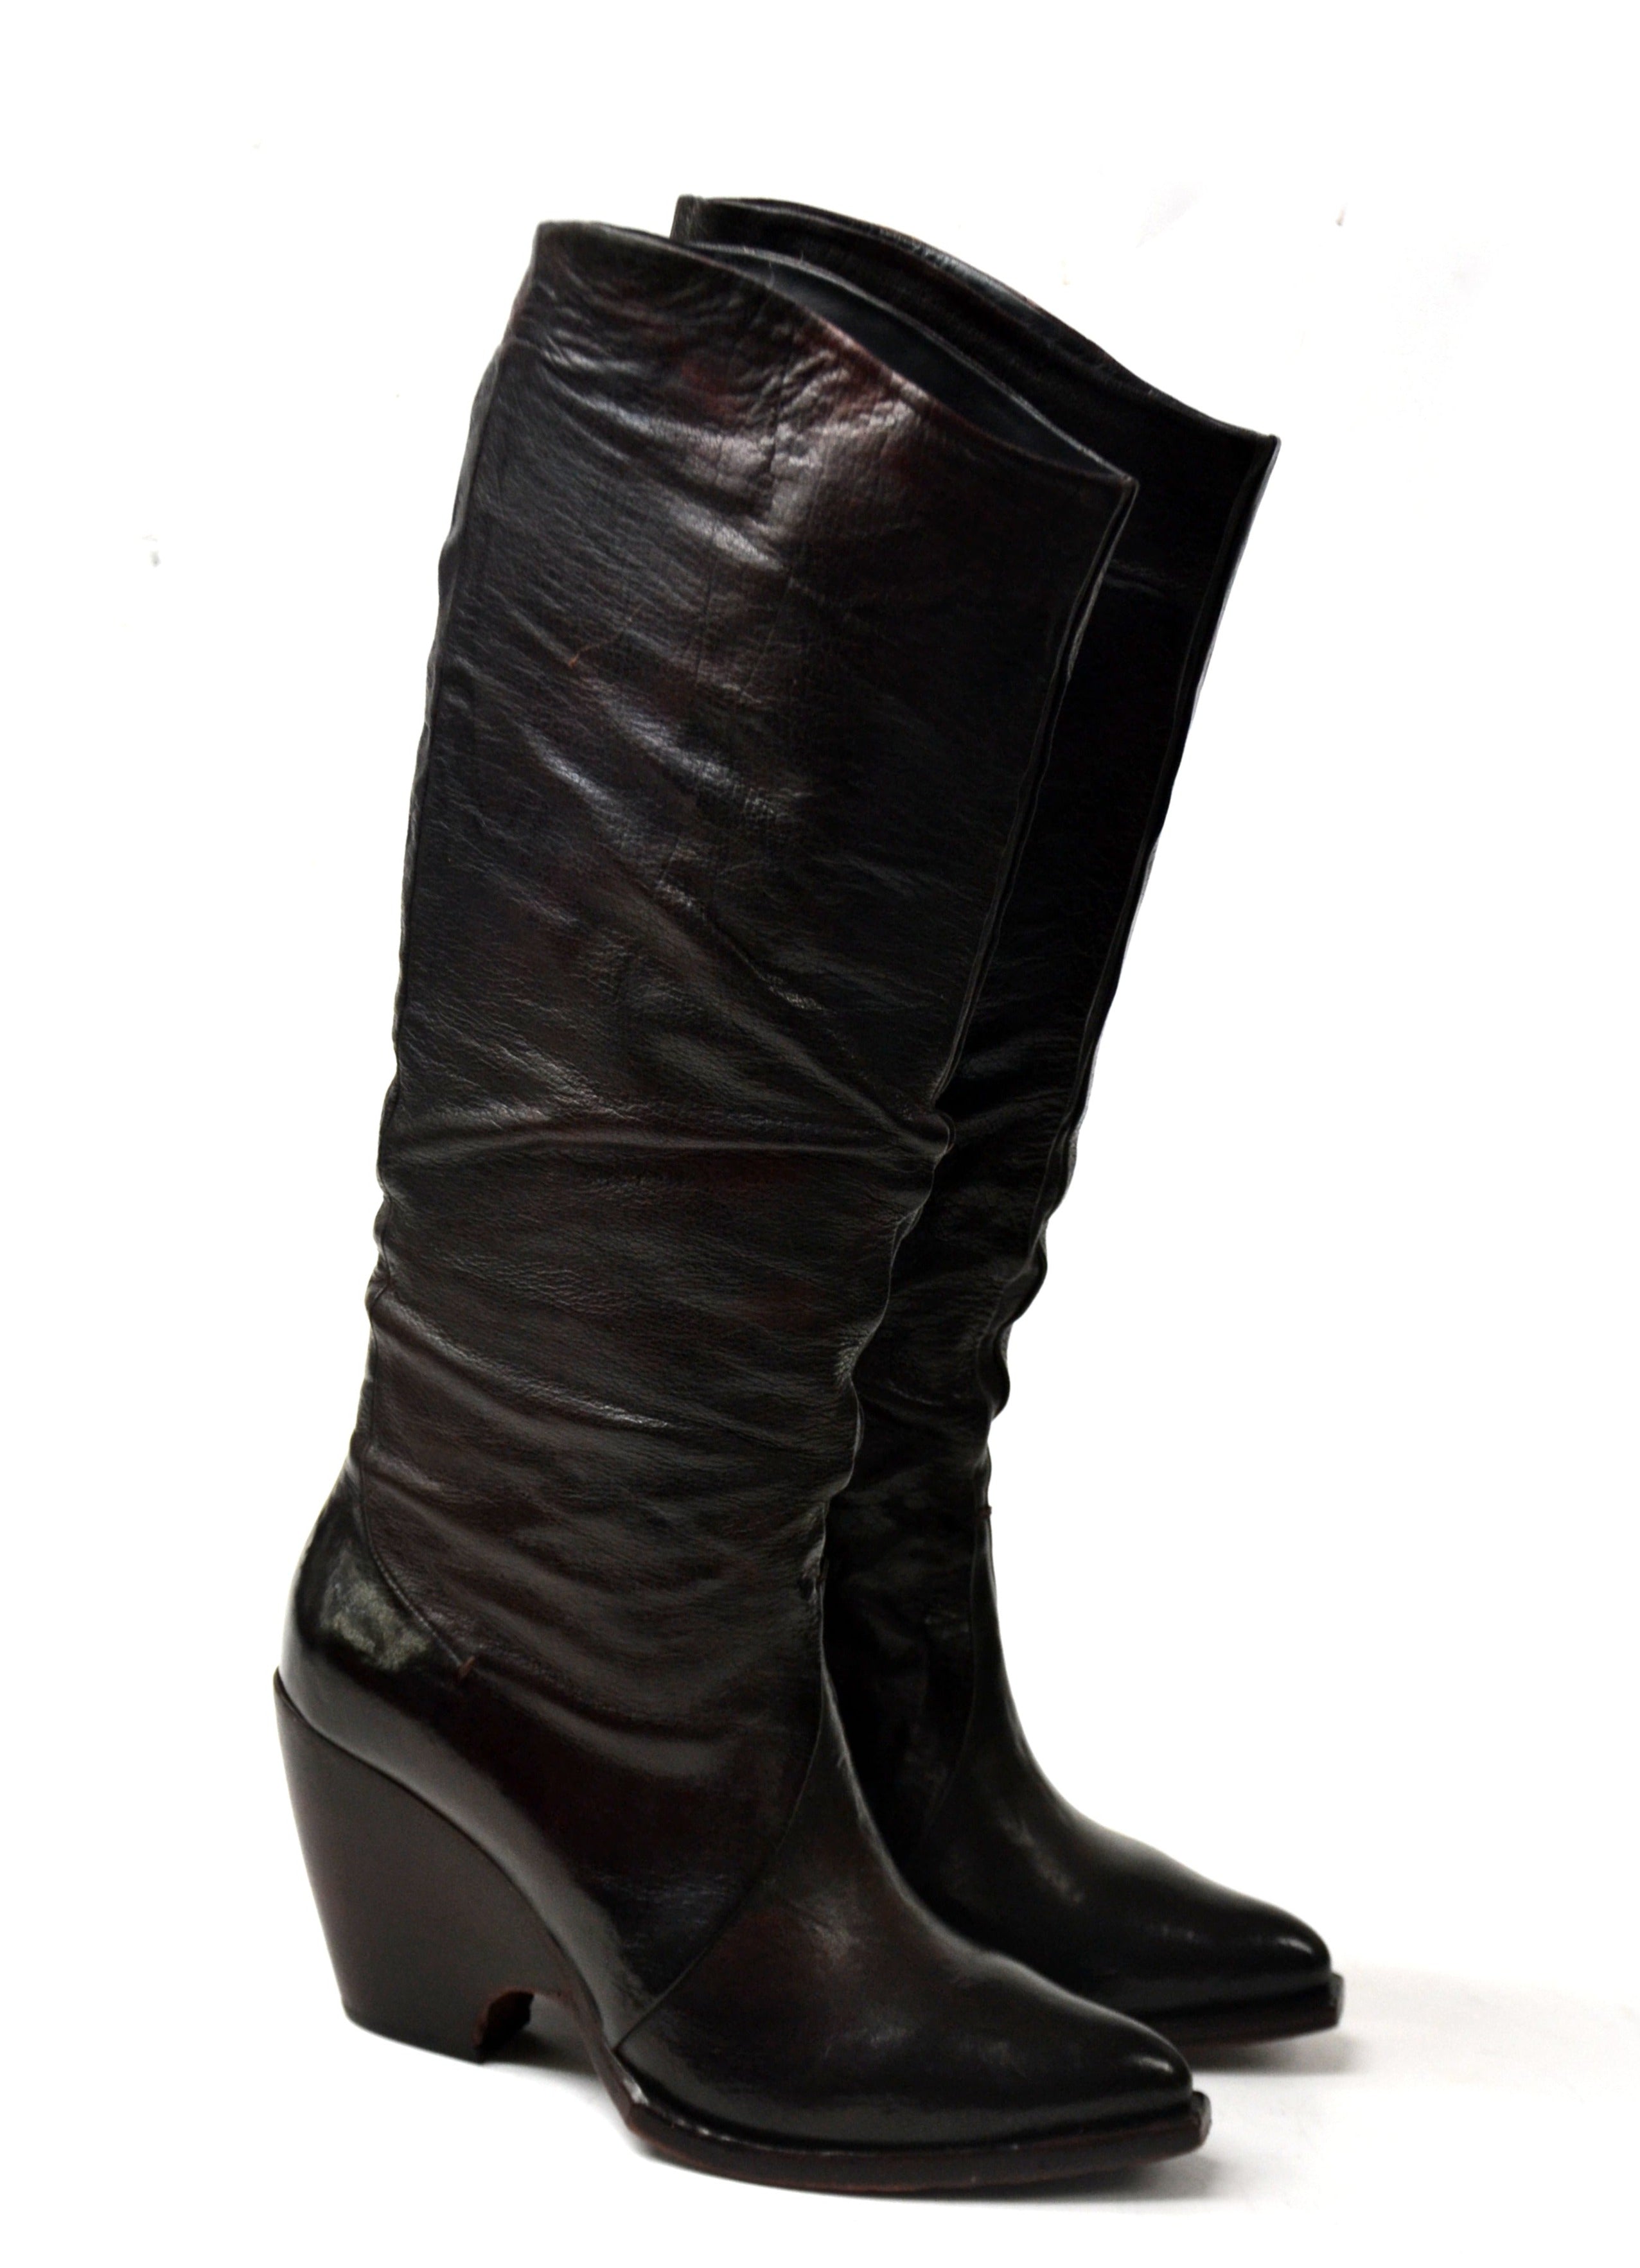 MEREDITH BORDEAUX HIGH BOOTS